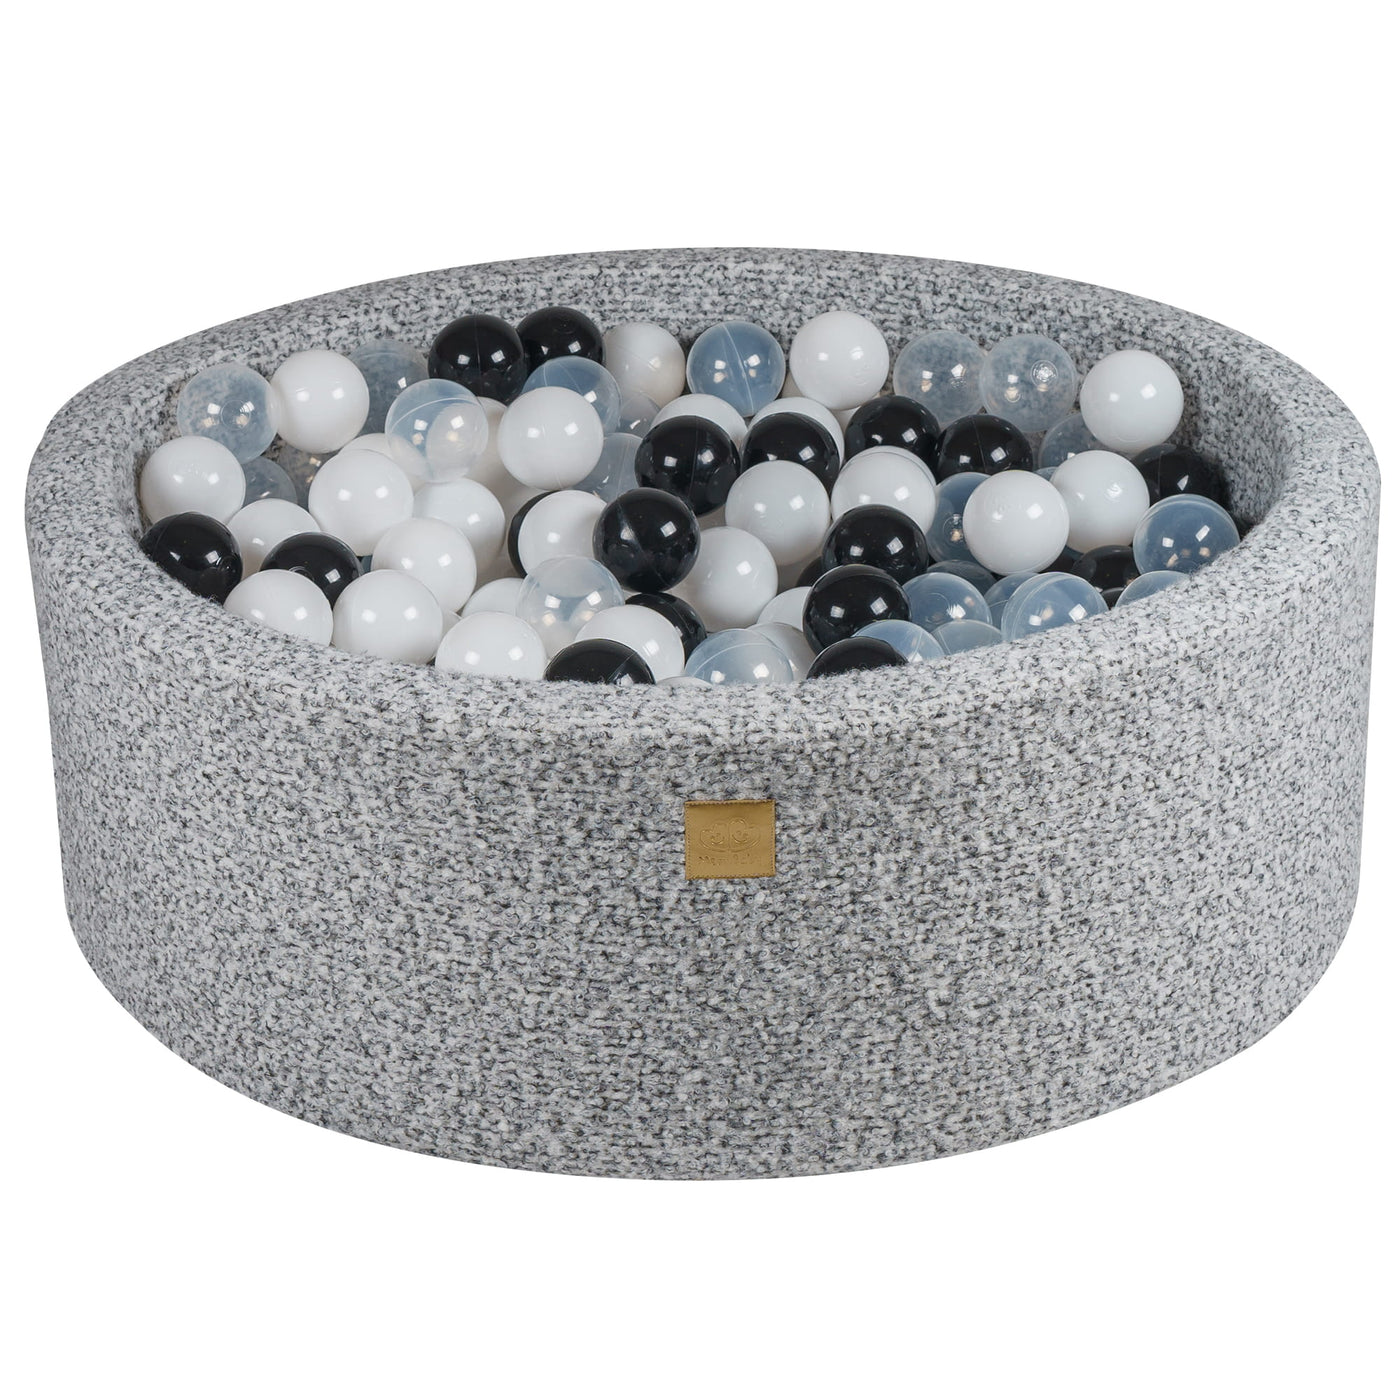 Marled Grey Boucle Ball Pit | Black, White & Clear Balls